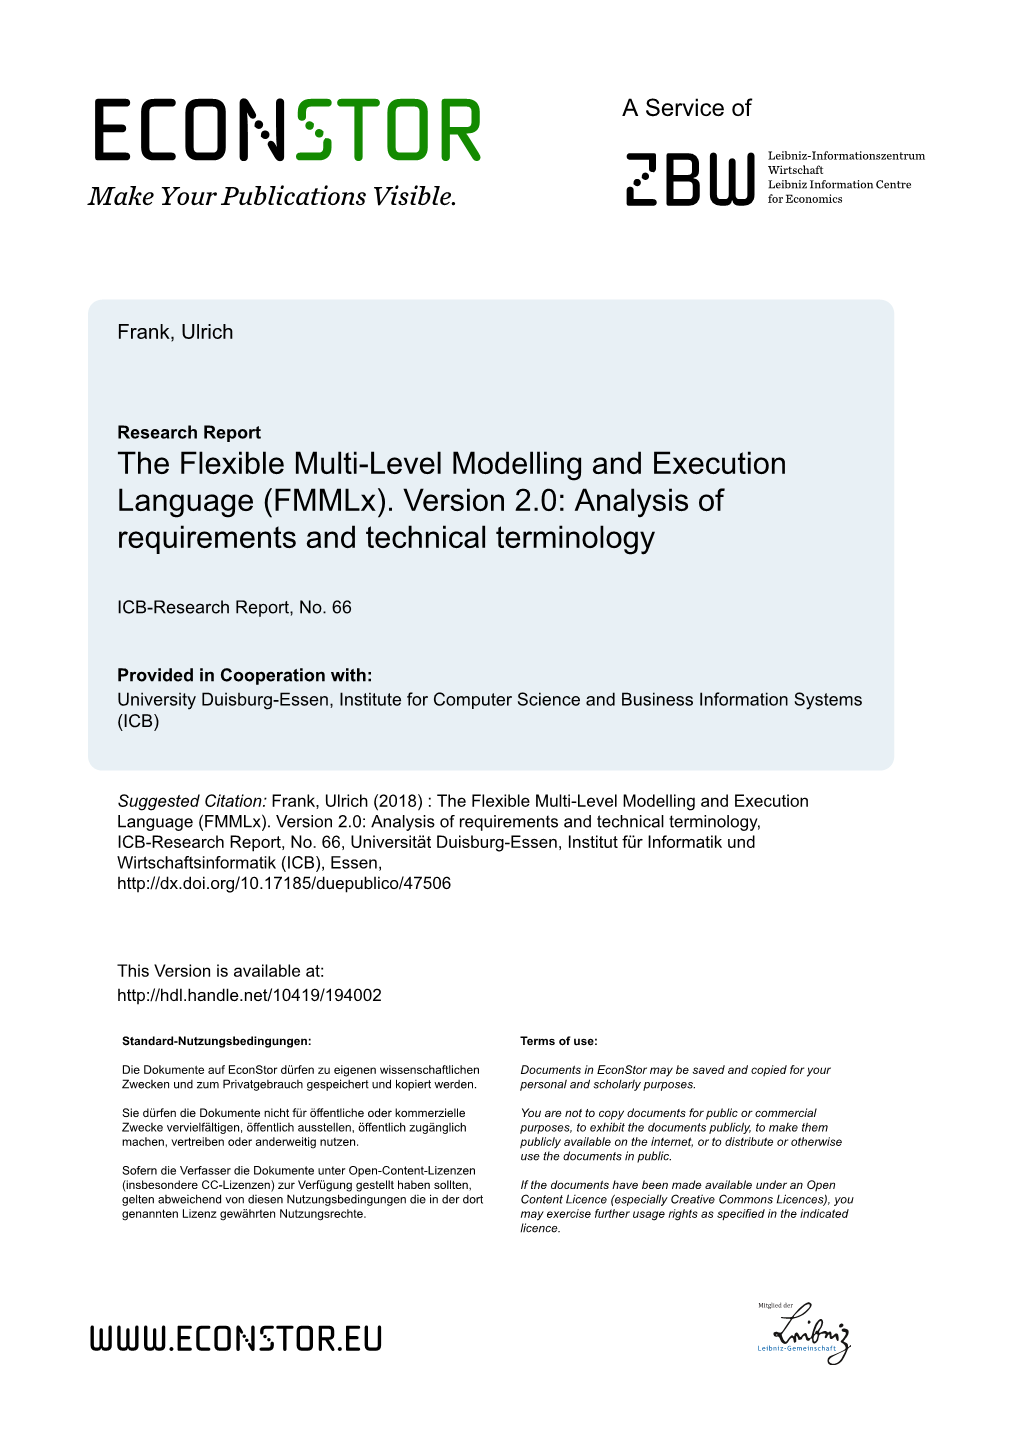 The Flexible Multi-Level Modelling and Execution Language (Fmmlx). Version 2.0: Analysis of Requirements and Technical Terminology